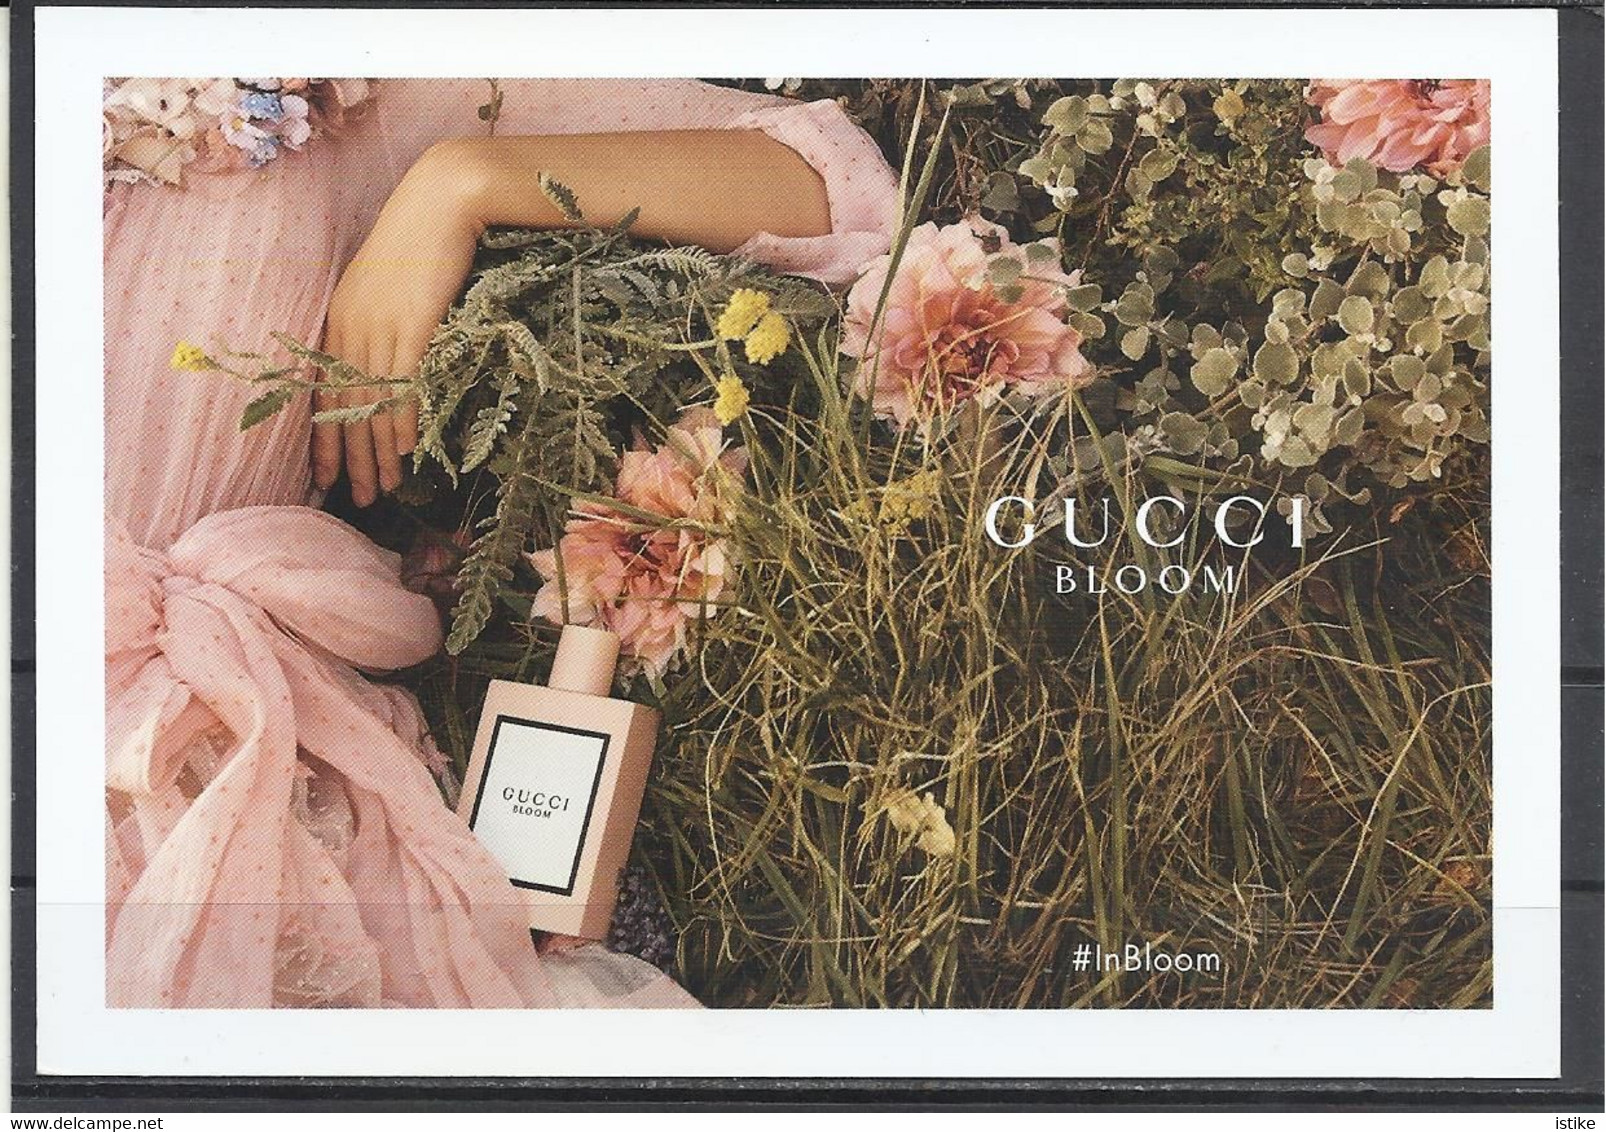 Gucci Bloom. - Beauty Products